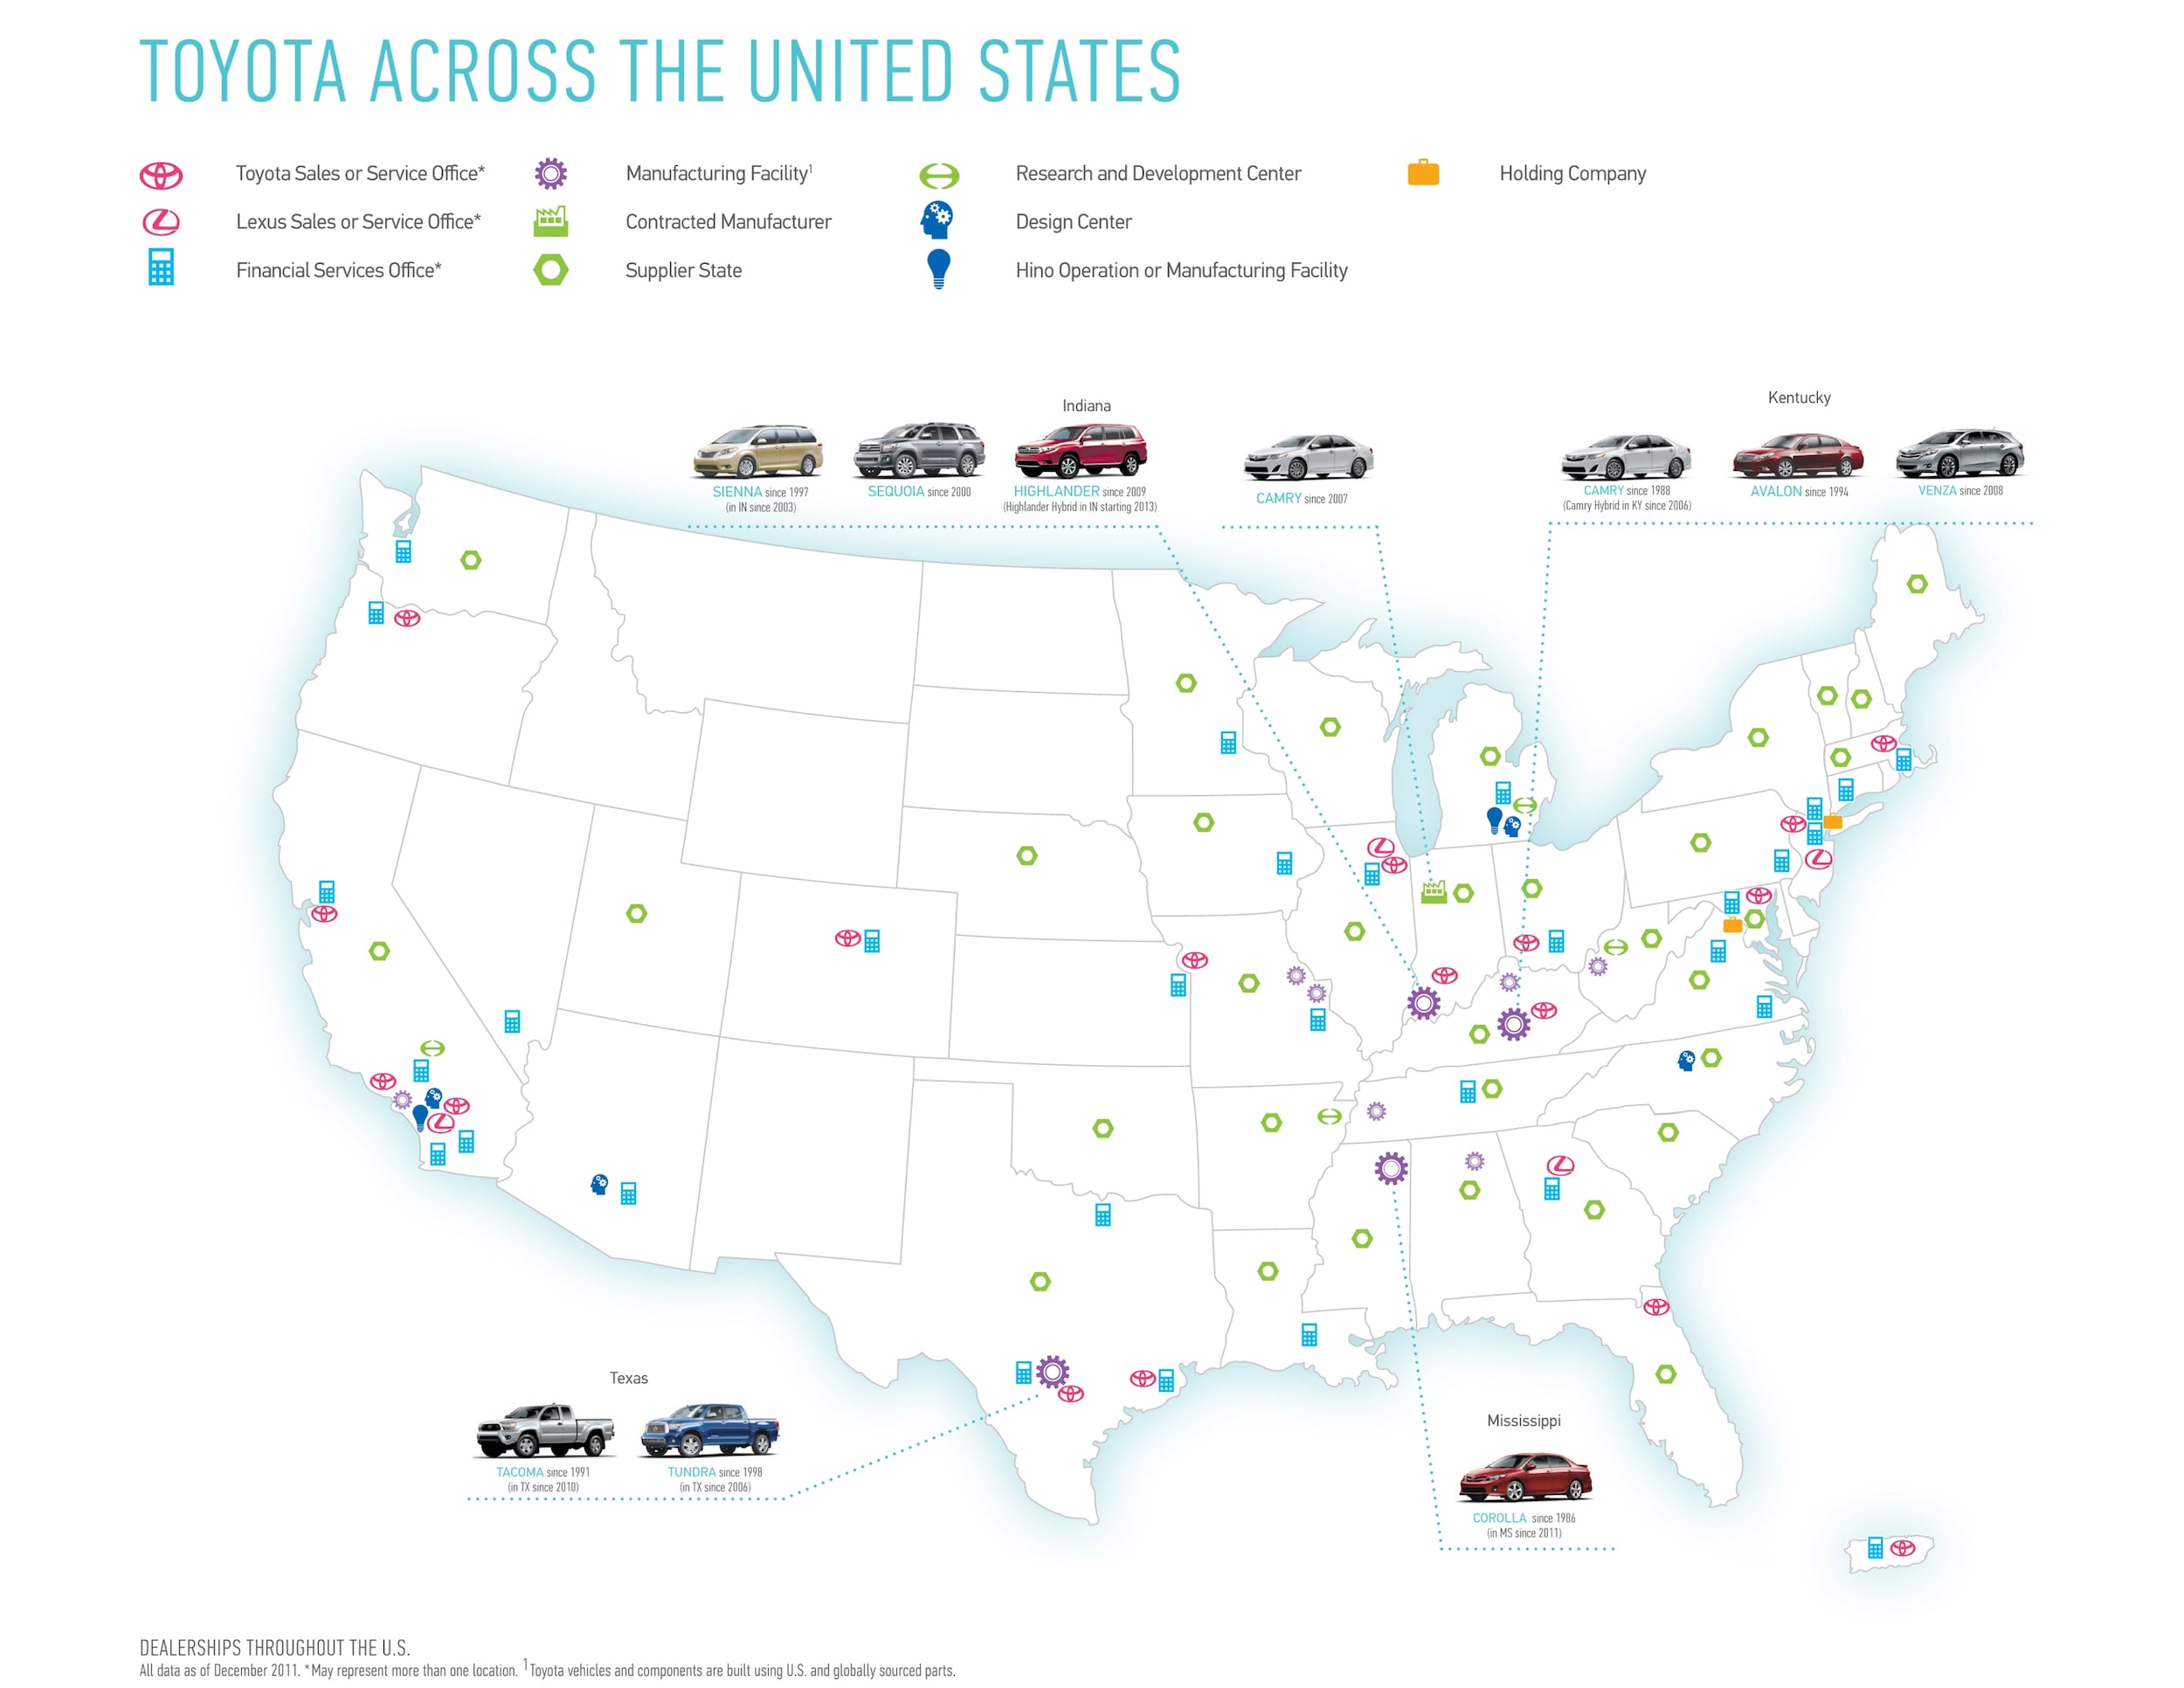 toyota plants in the us #1